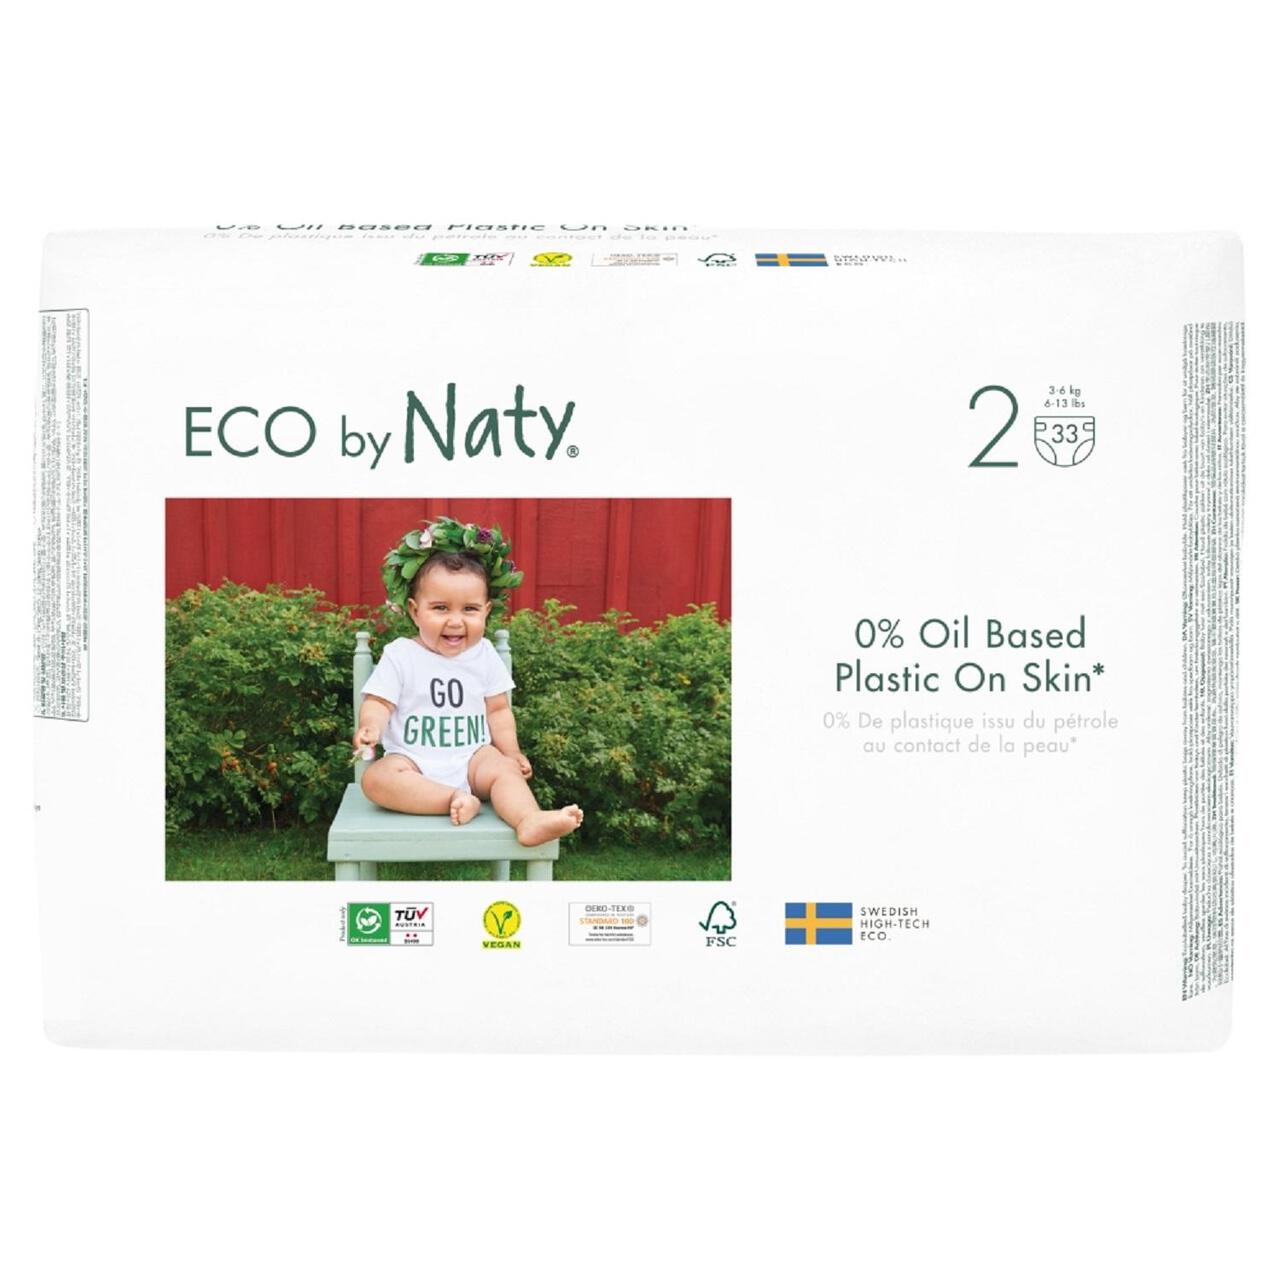 Eco by Naty Nappies, Size 2 33 per pack